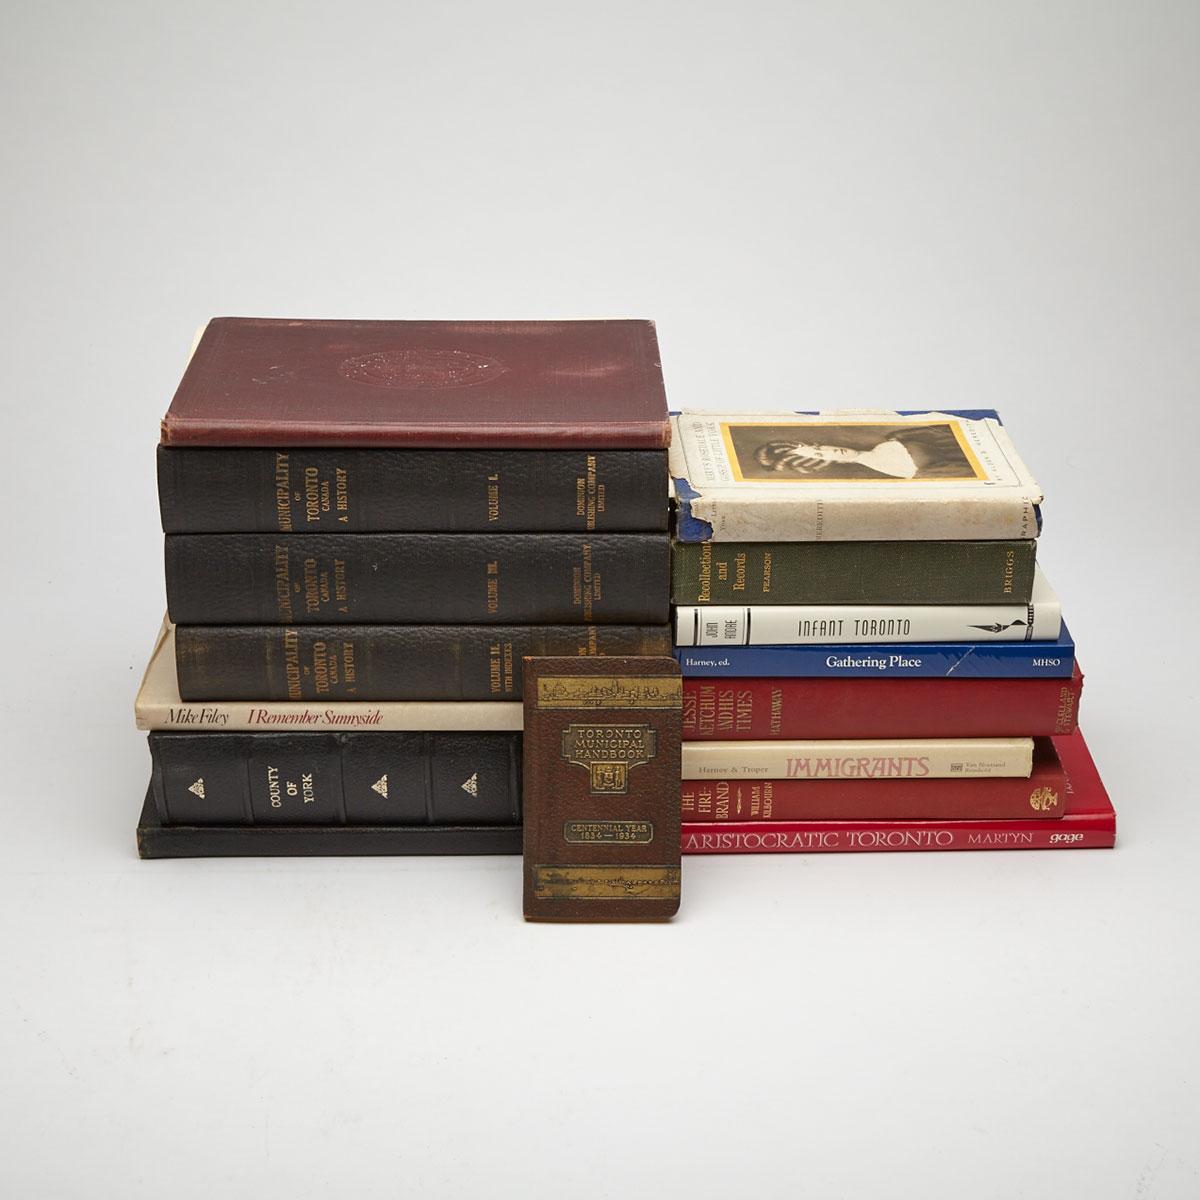 Sixteen 19th and Early 20th Century Volumes On Toronto